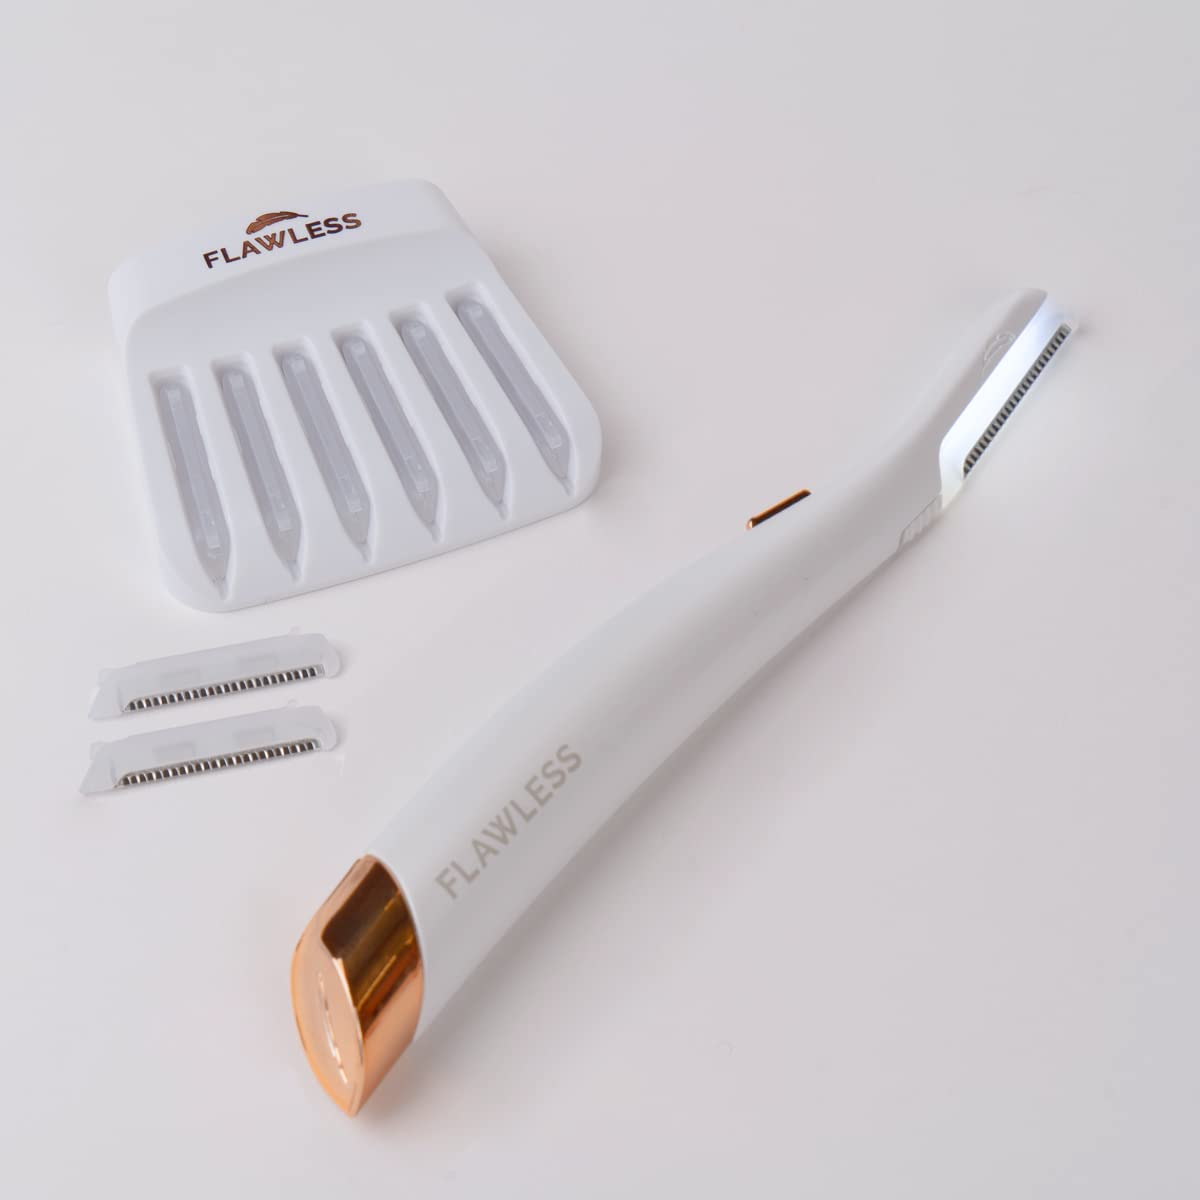 Finishing Touch Flawless Dermaplane Glo Lighted Facial Exfoliator - Non-Vibrating and Includes 6 Replacement Heads, White/Rose Gold